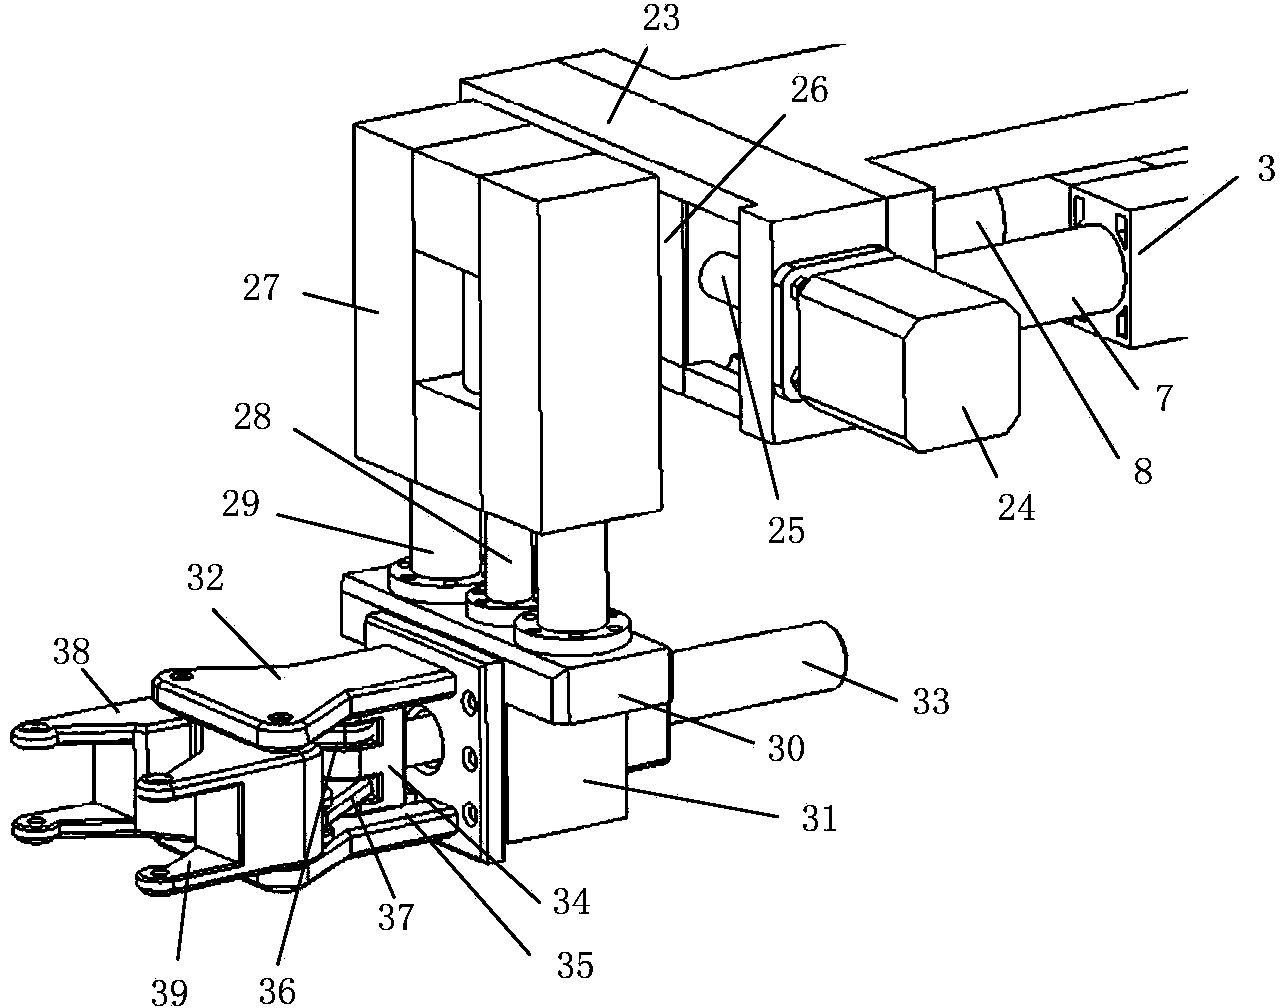 Oilfield blowout control operation device and method